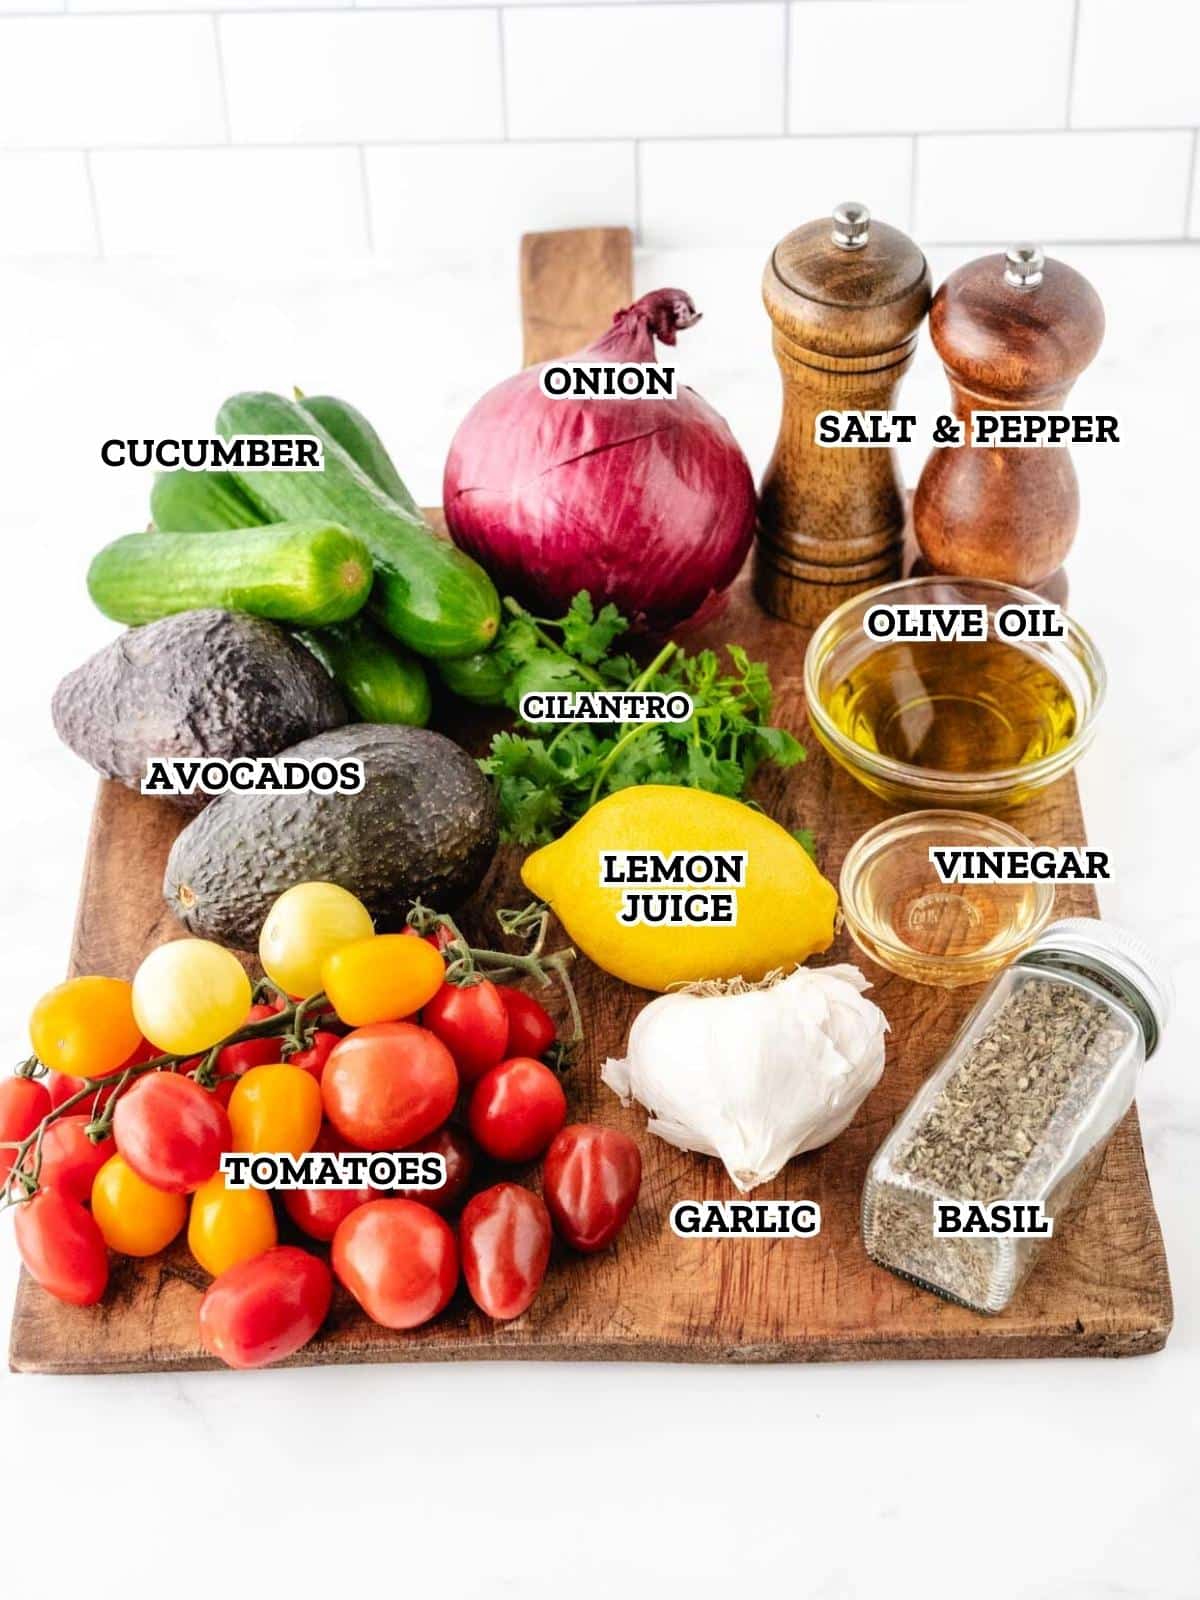 A labeled image of ingredients needed to make cucumber tomato avocado salad.